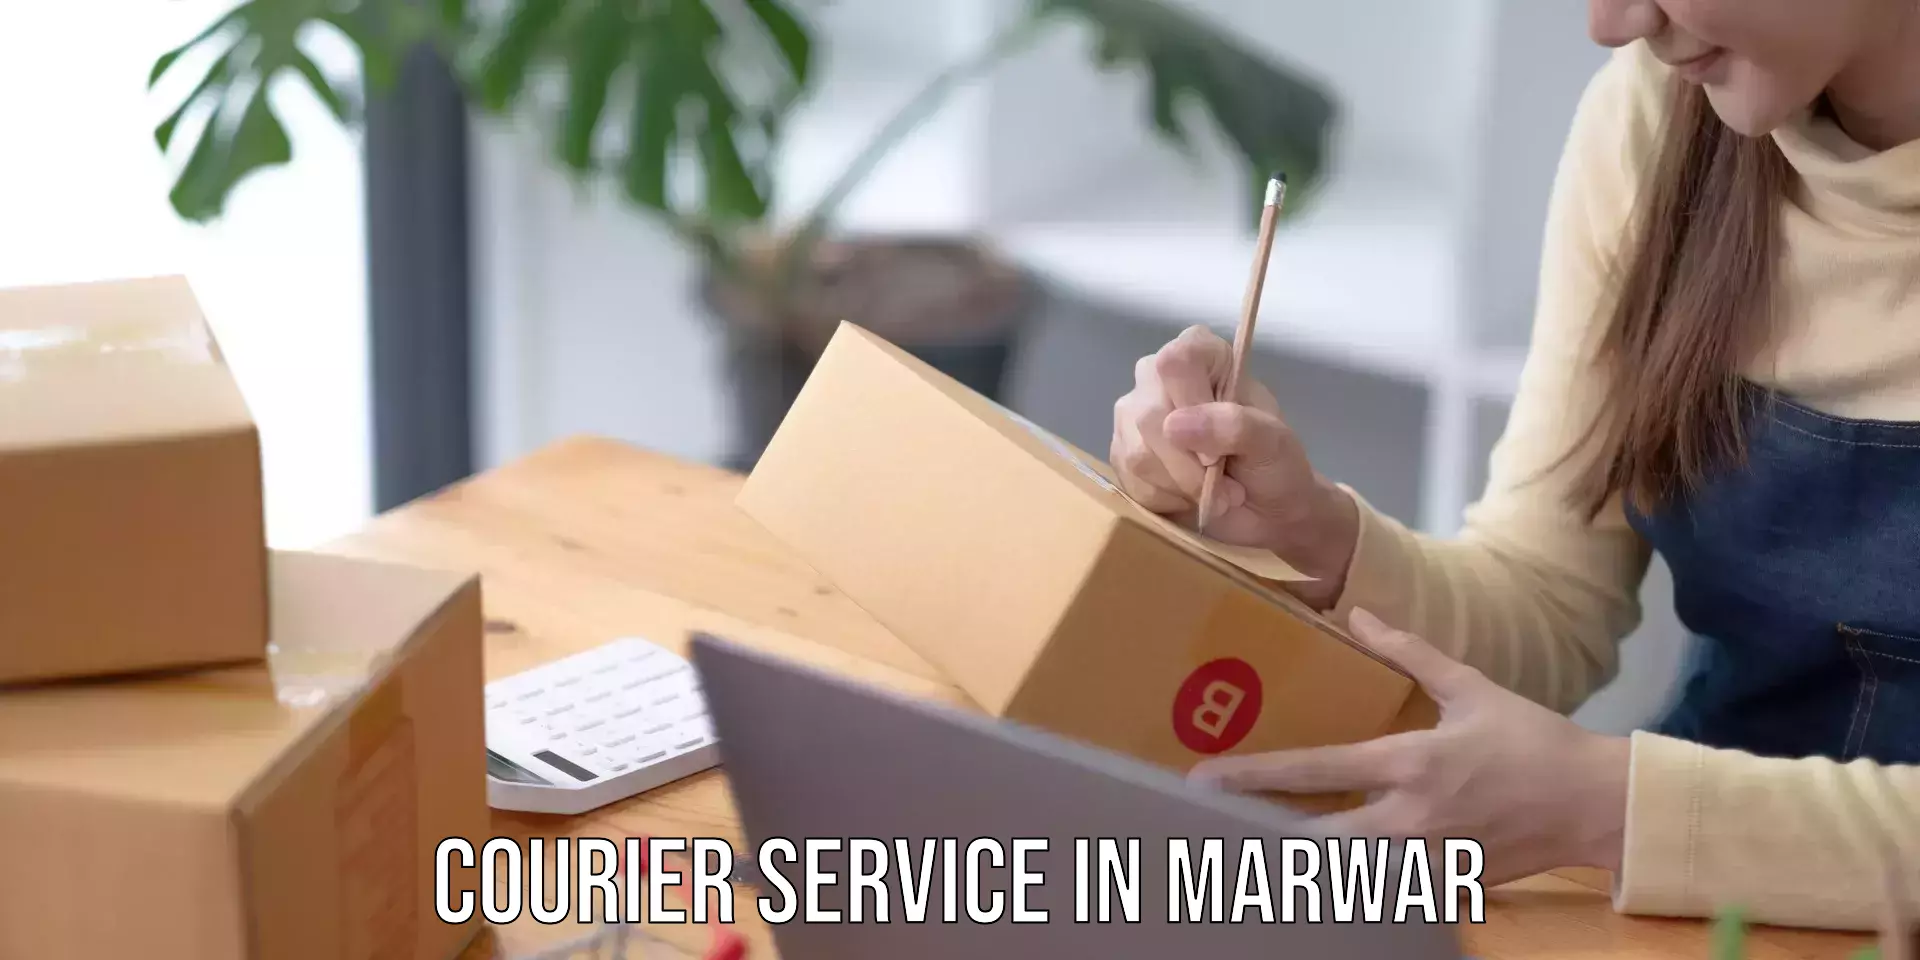 Expedited parcel delivery in Marwar